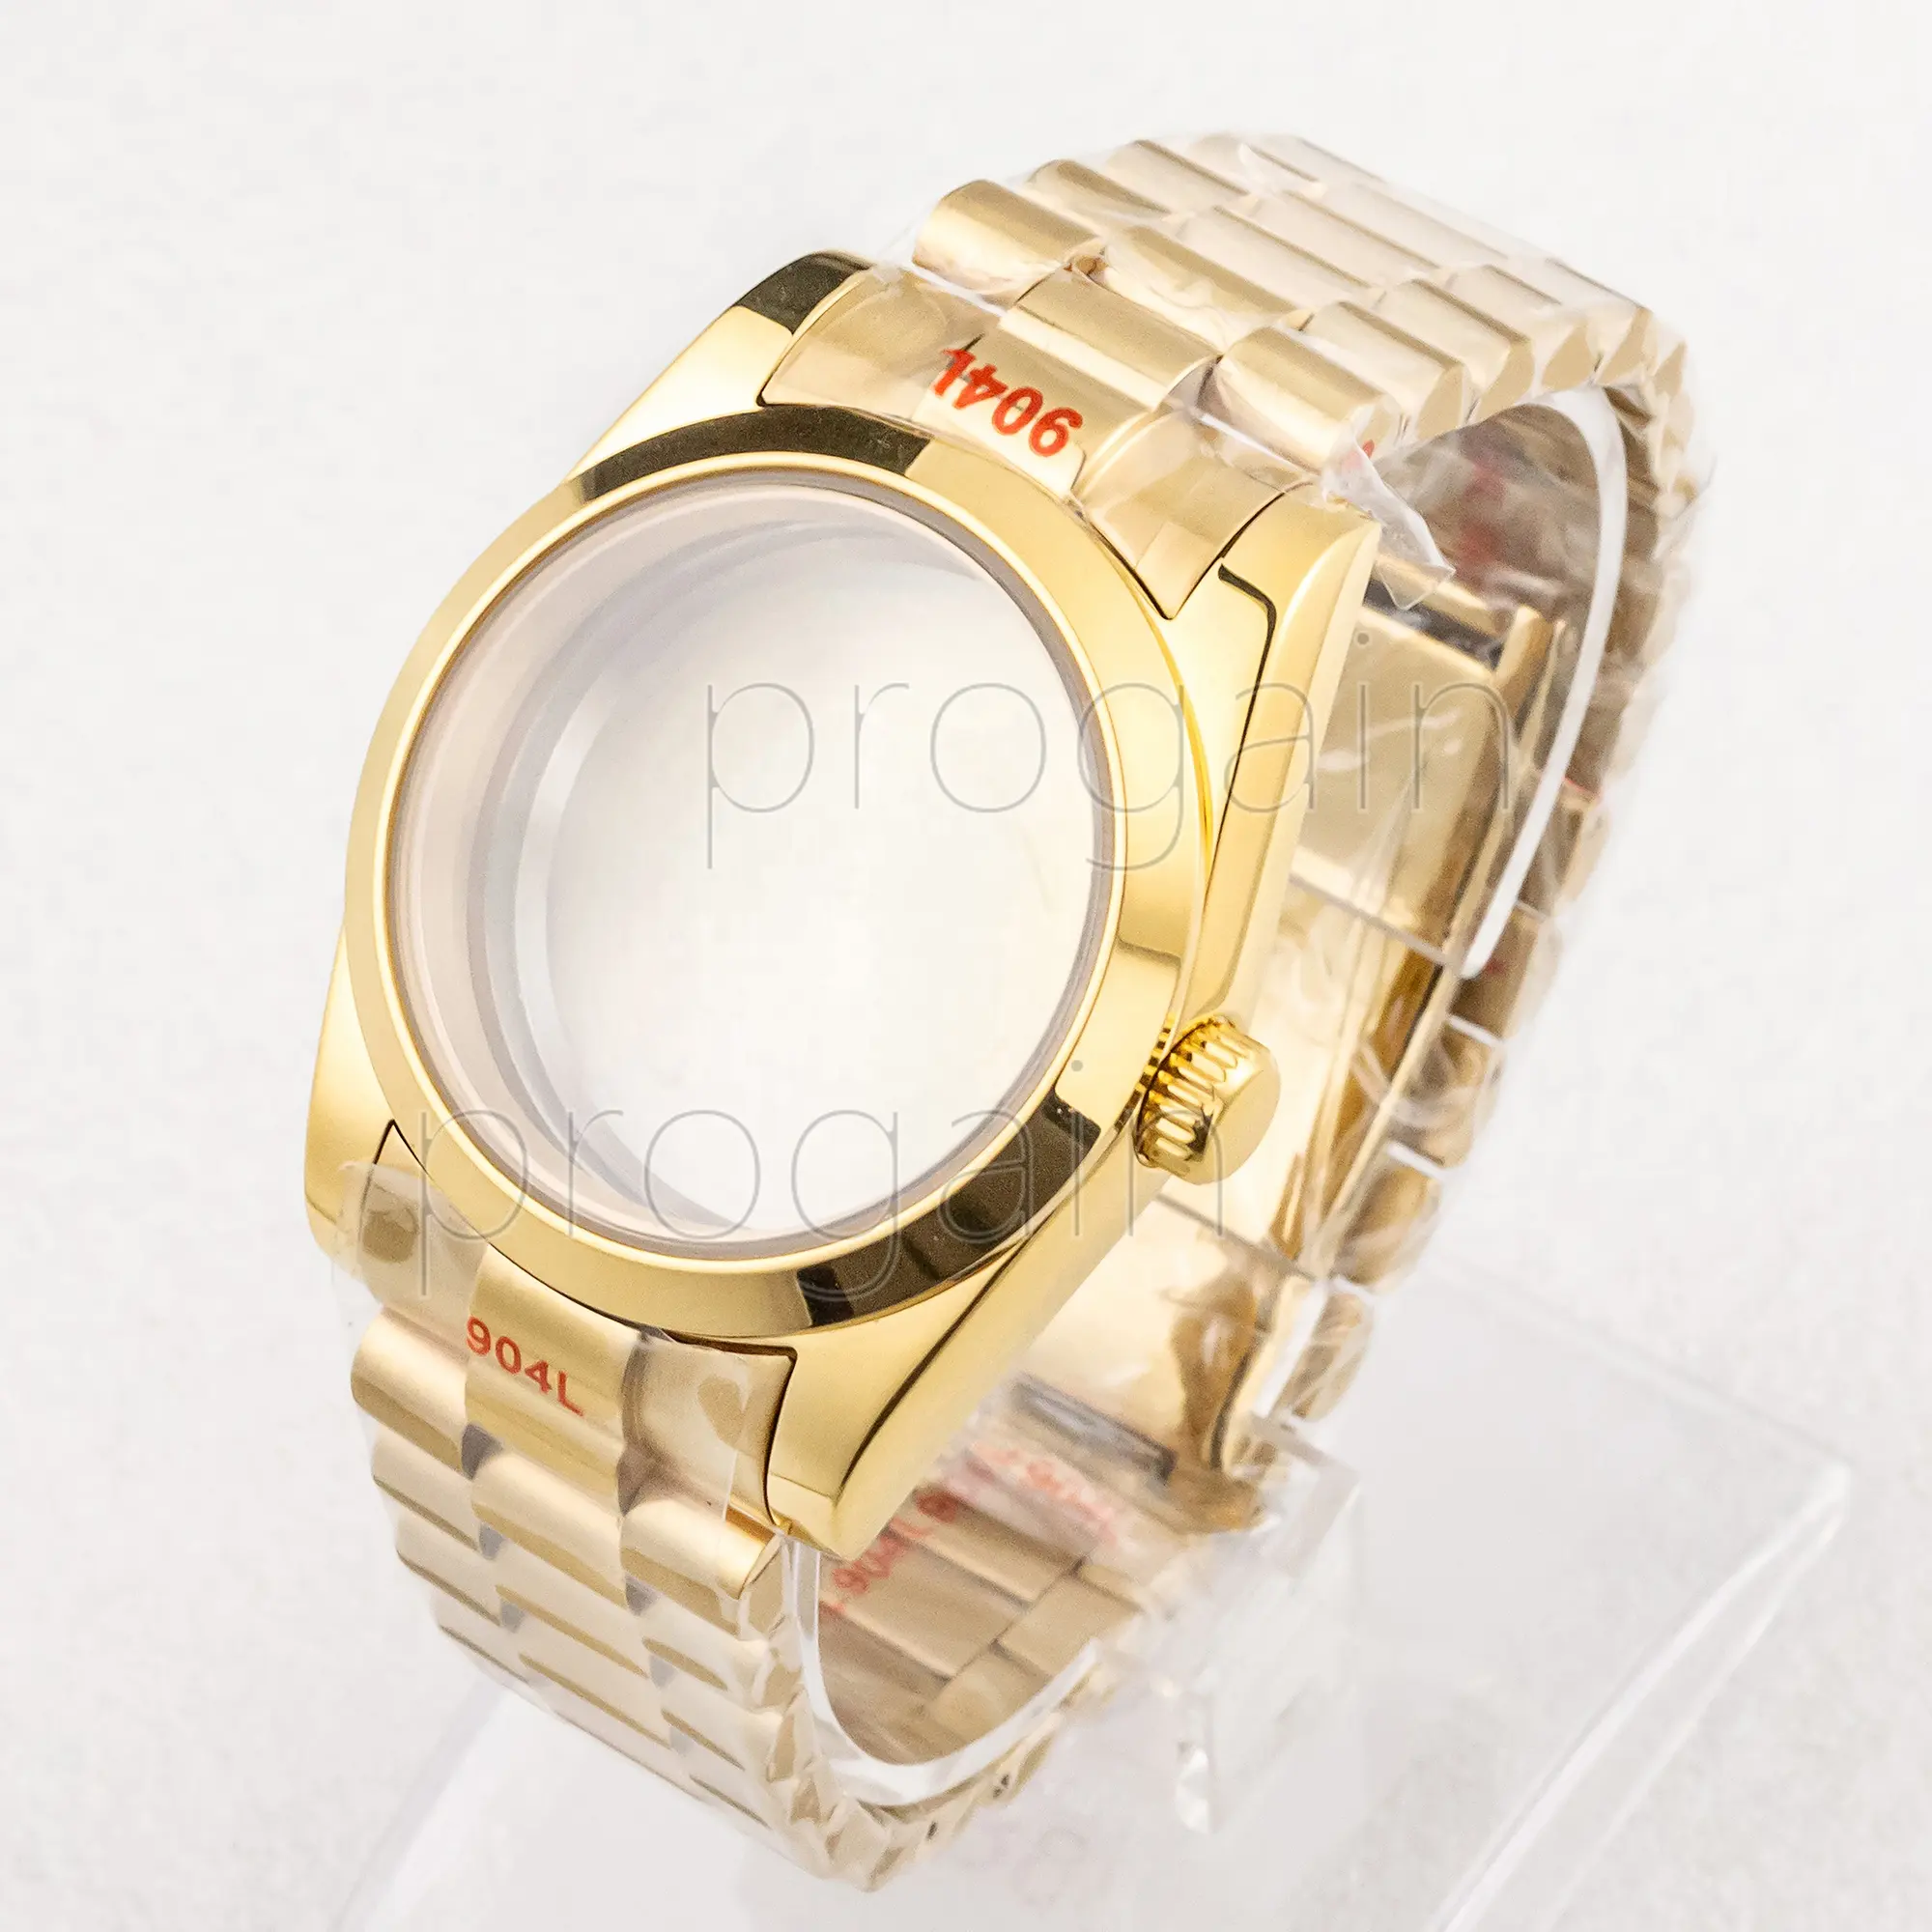 39mm Watch Case Bevel Edge Bezel Sapphire Mirror Box PVD Gold Watch Band for NH35 NH36 Movement Waterproof Modification Kits